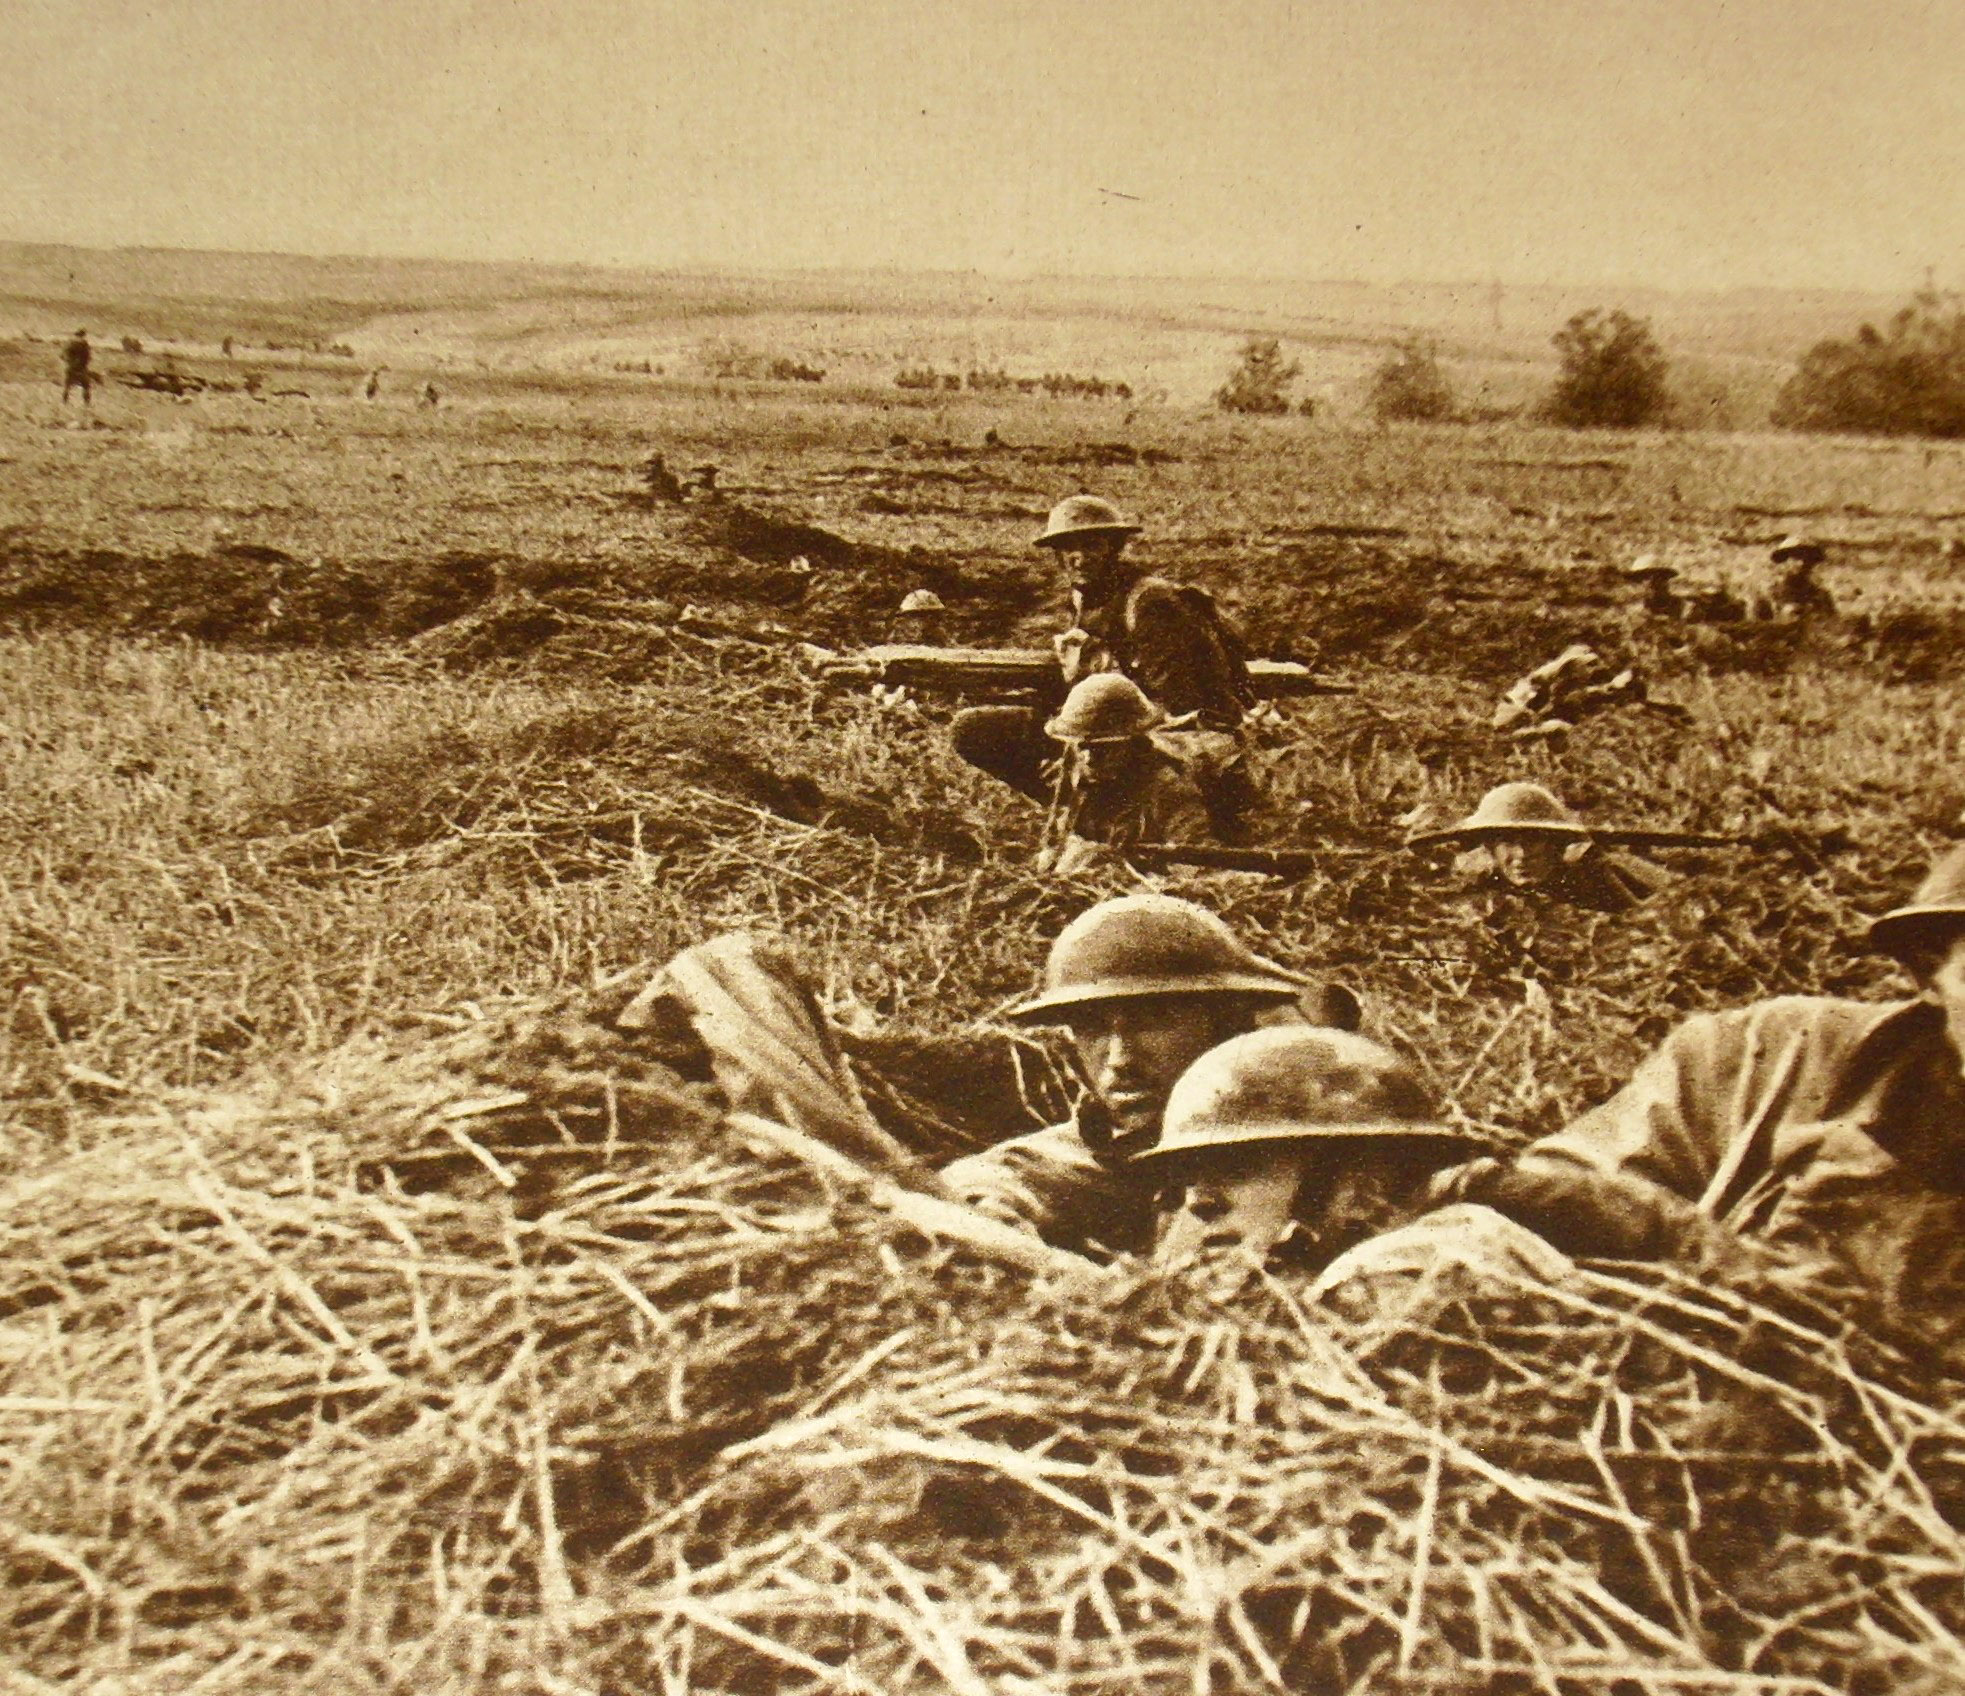 American Troops in World War I image - Free stock photo - Public Domain